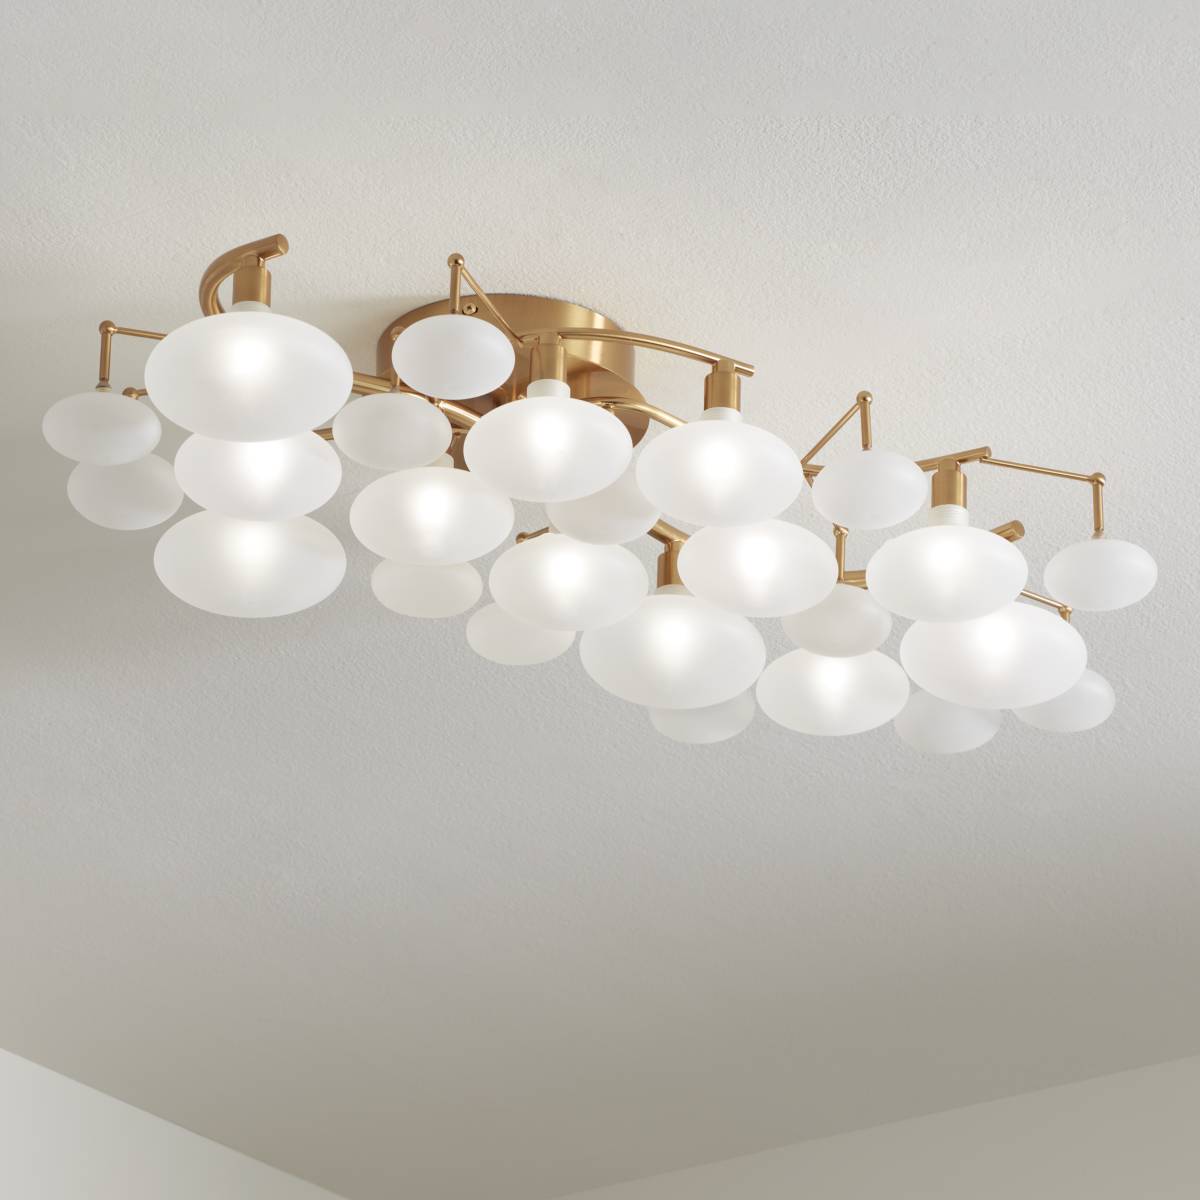 https://image.lampsplus.com/is/image/b9gt8/possini-euro-lilypad-30-and-one-quarter-warm-brass-frosted-glass-ceiling-light__281w0cropped.jpg?qlt=70&wid=1200&hei=1200&fmt=jpeg